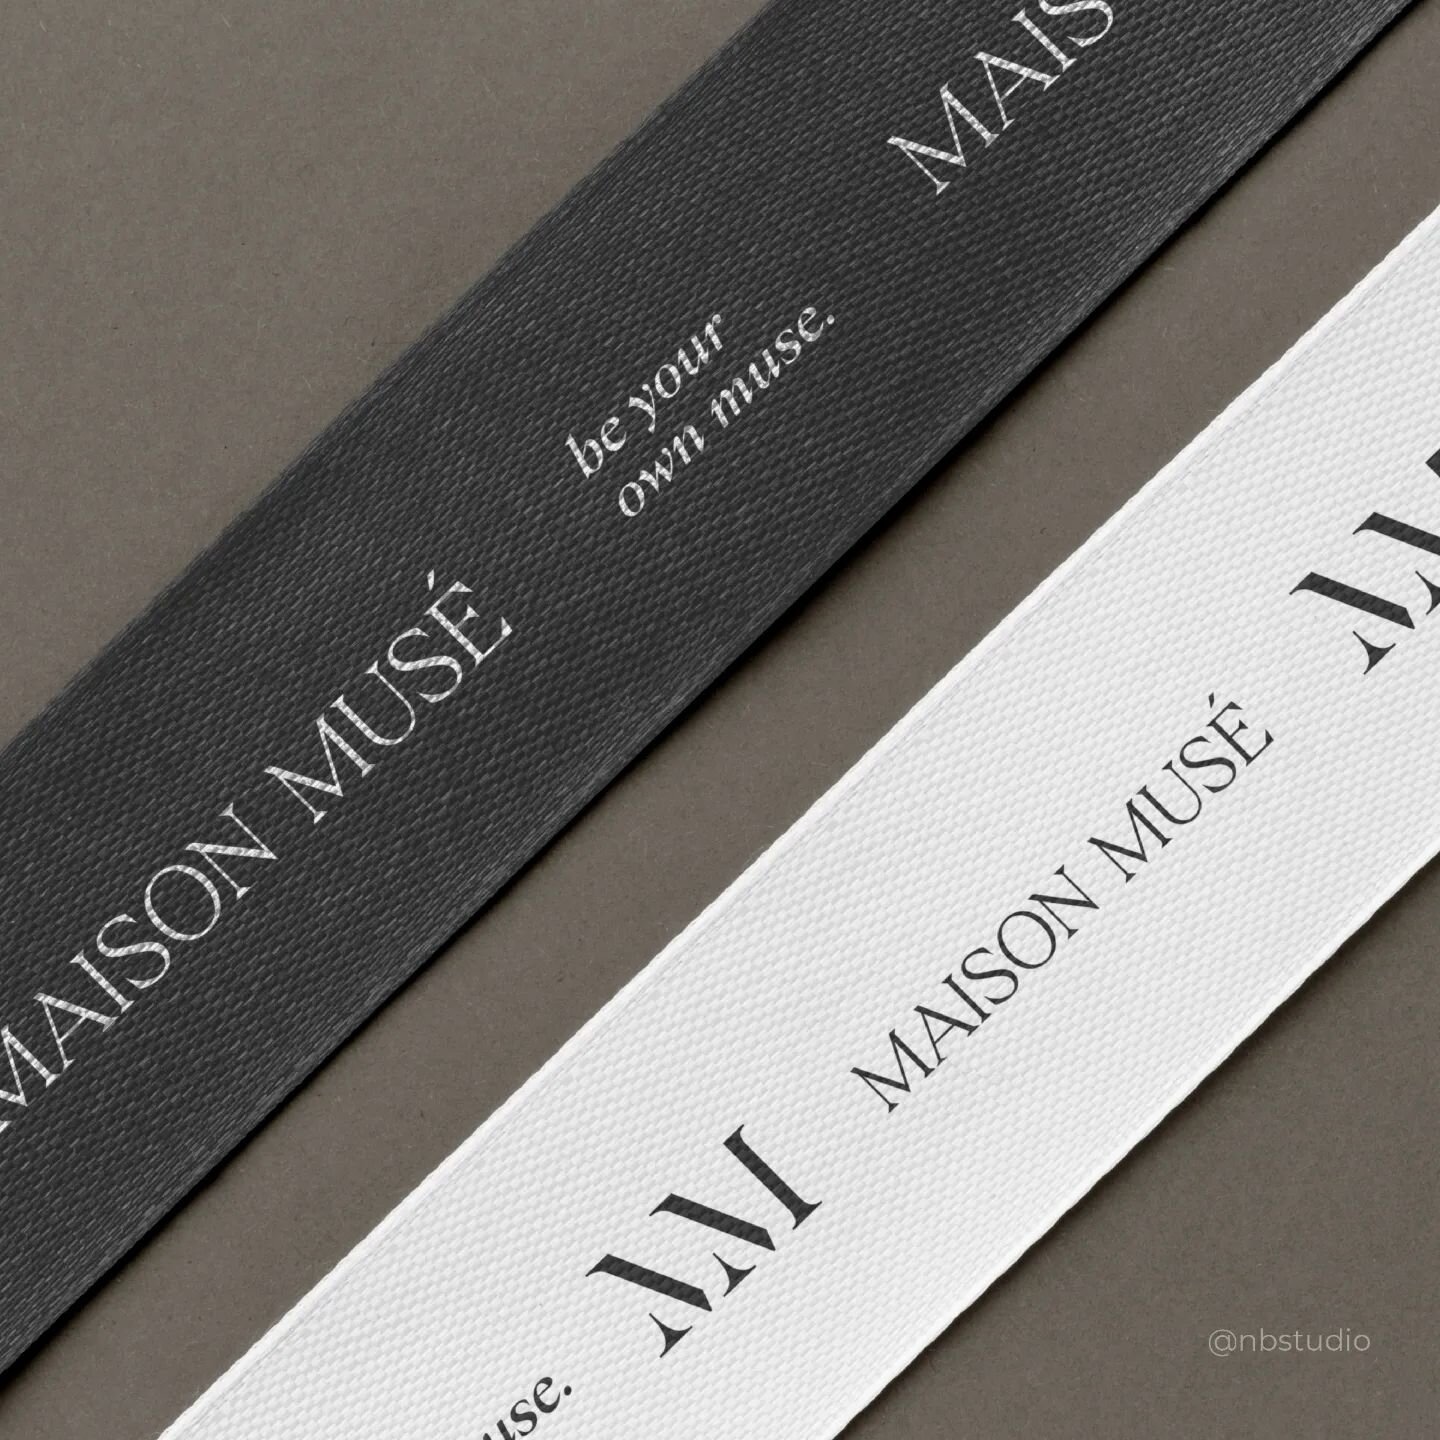 MAISON MUS&Eacute; {@maisonmuse_official} | Brand Development, Naming &amp; Identity Design

The name: Maison Mus&eacute; invites you to feel good in your skin and be your own muse. The name means &ldquo;House (or home) of the muse,&rdquo; where Mais